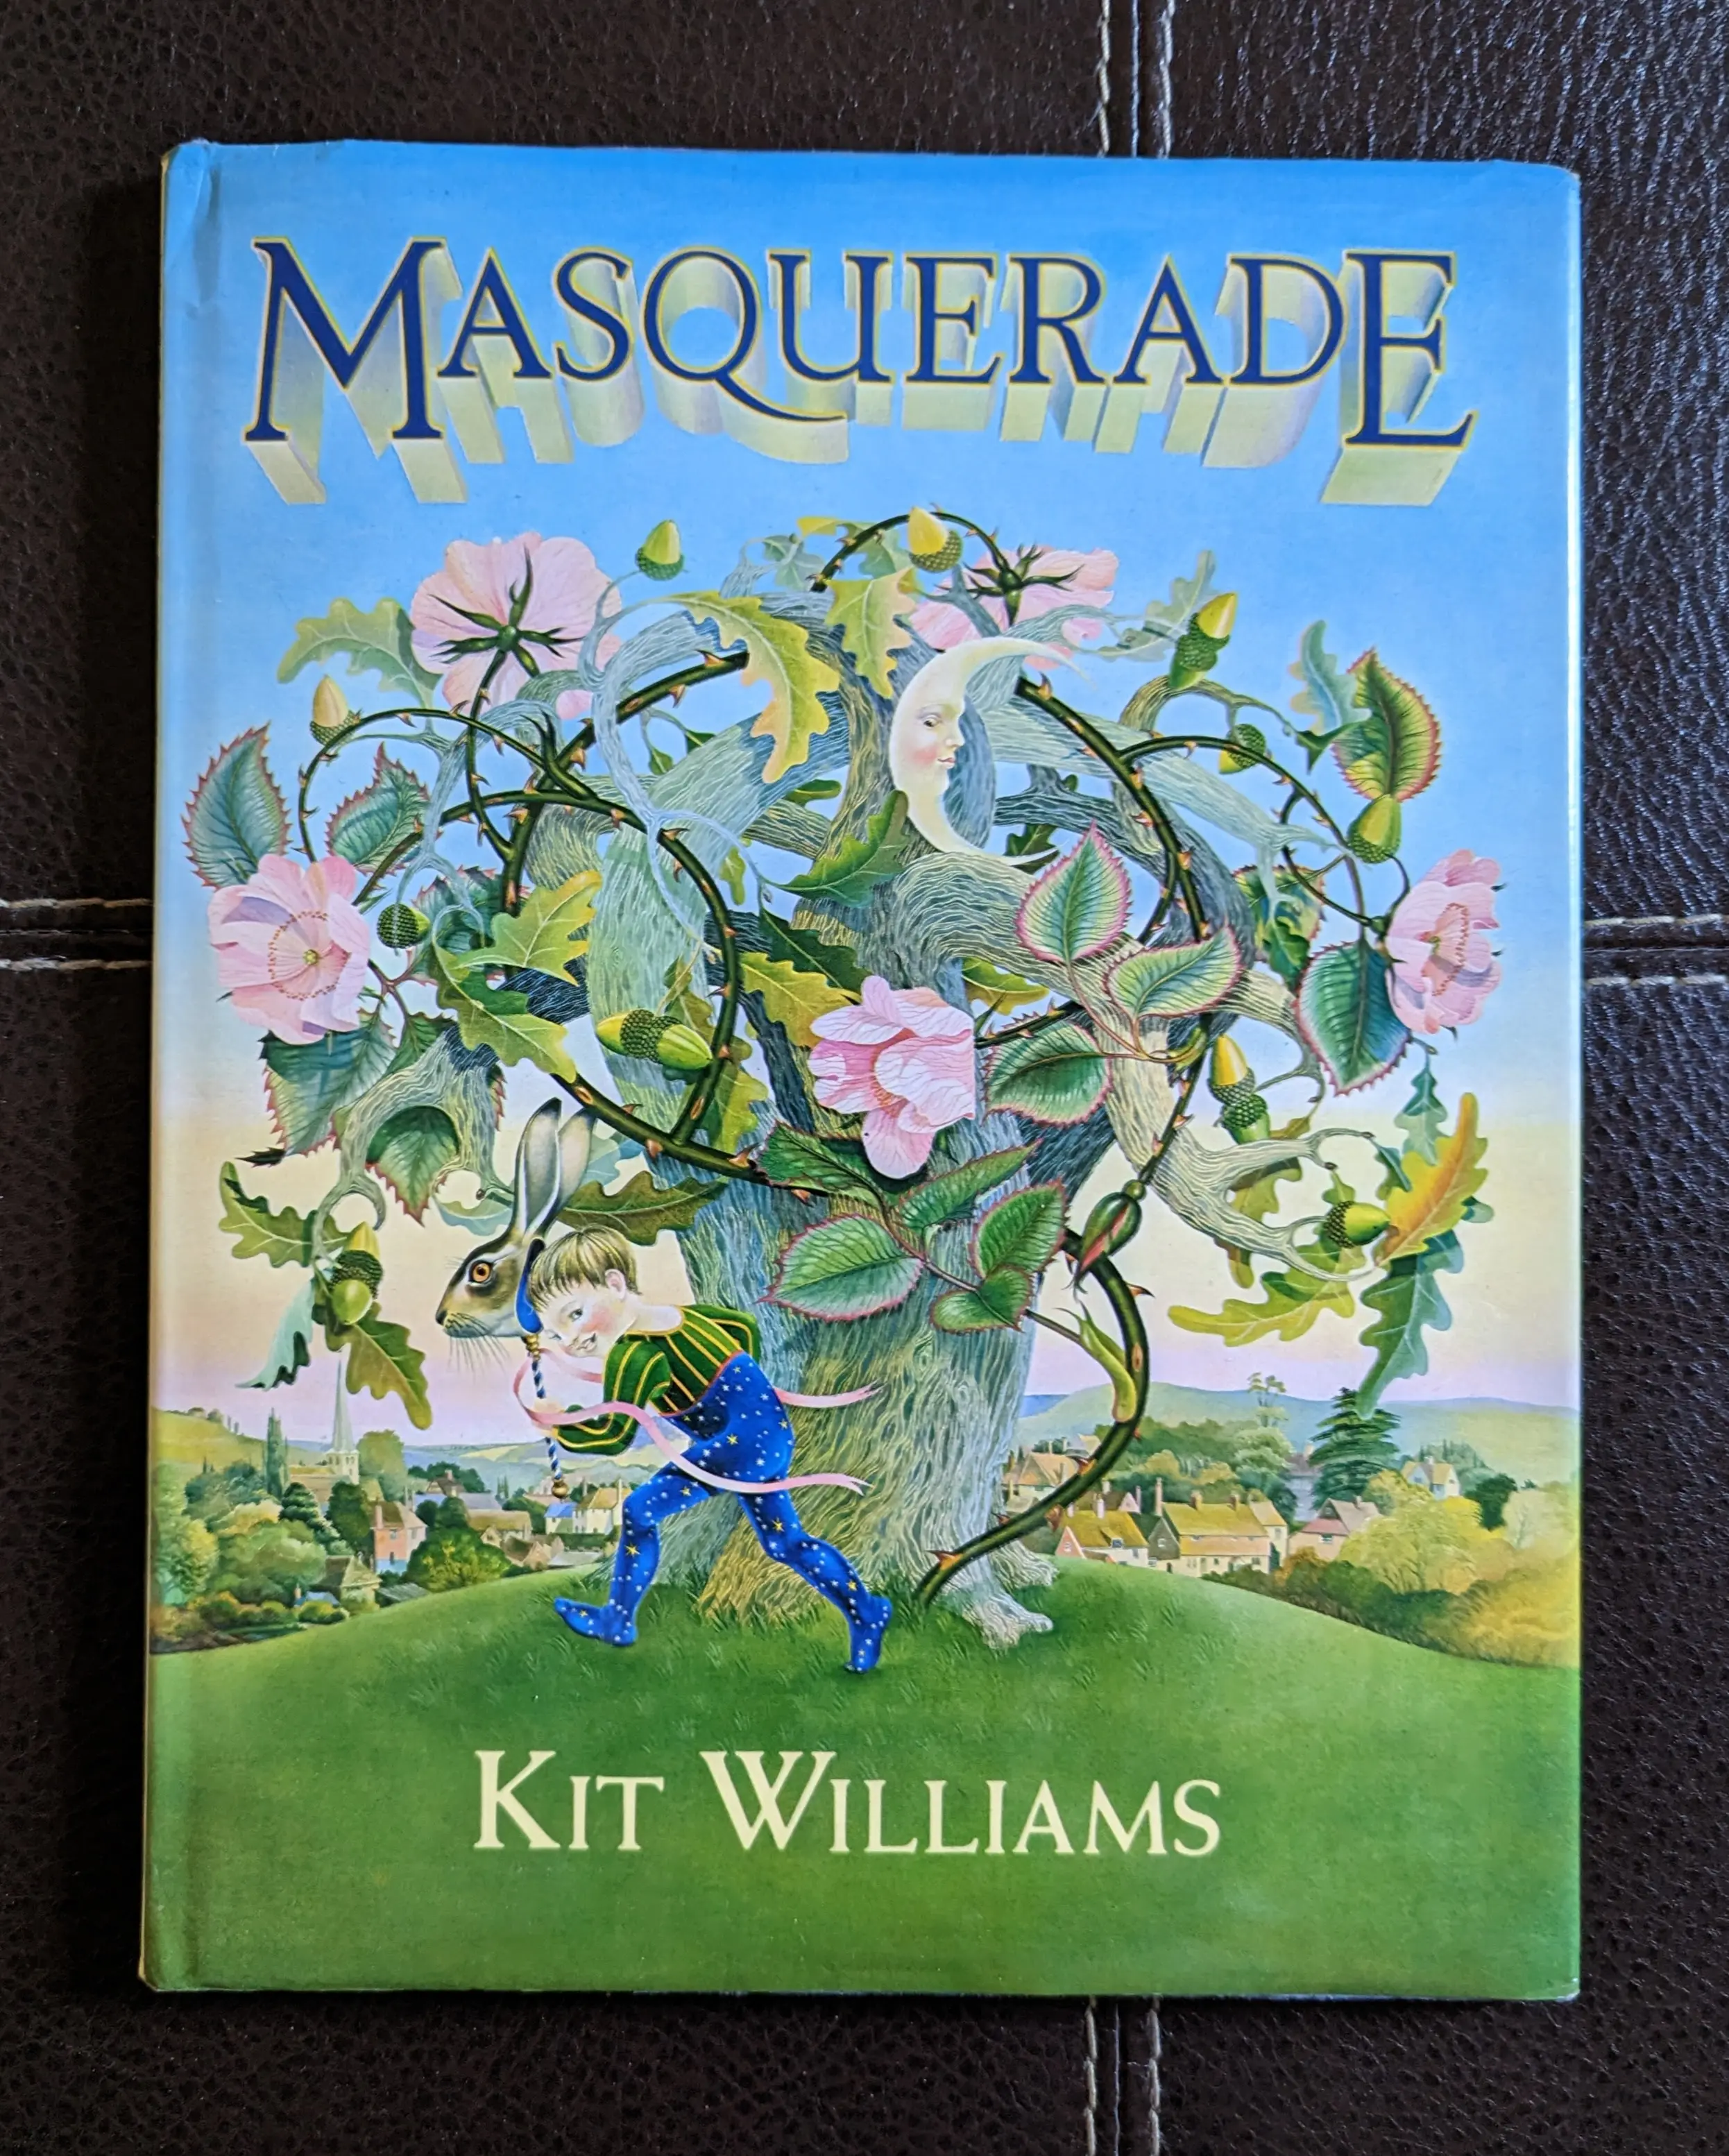 Masquerade by Kit Williams, 1979